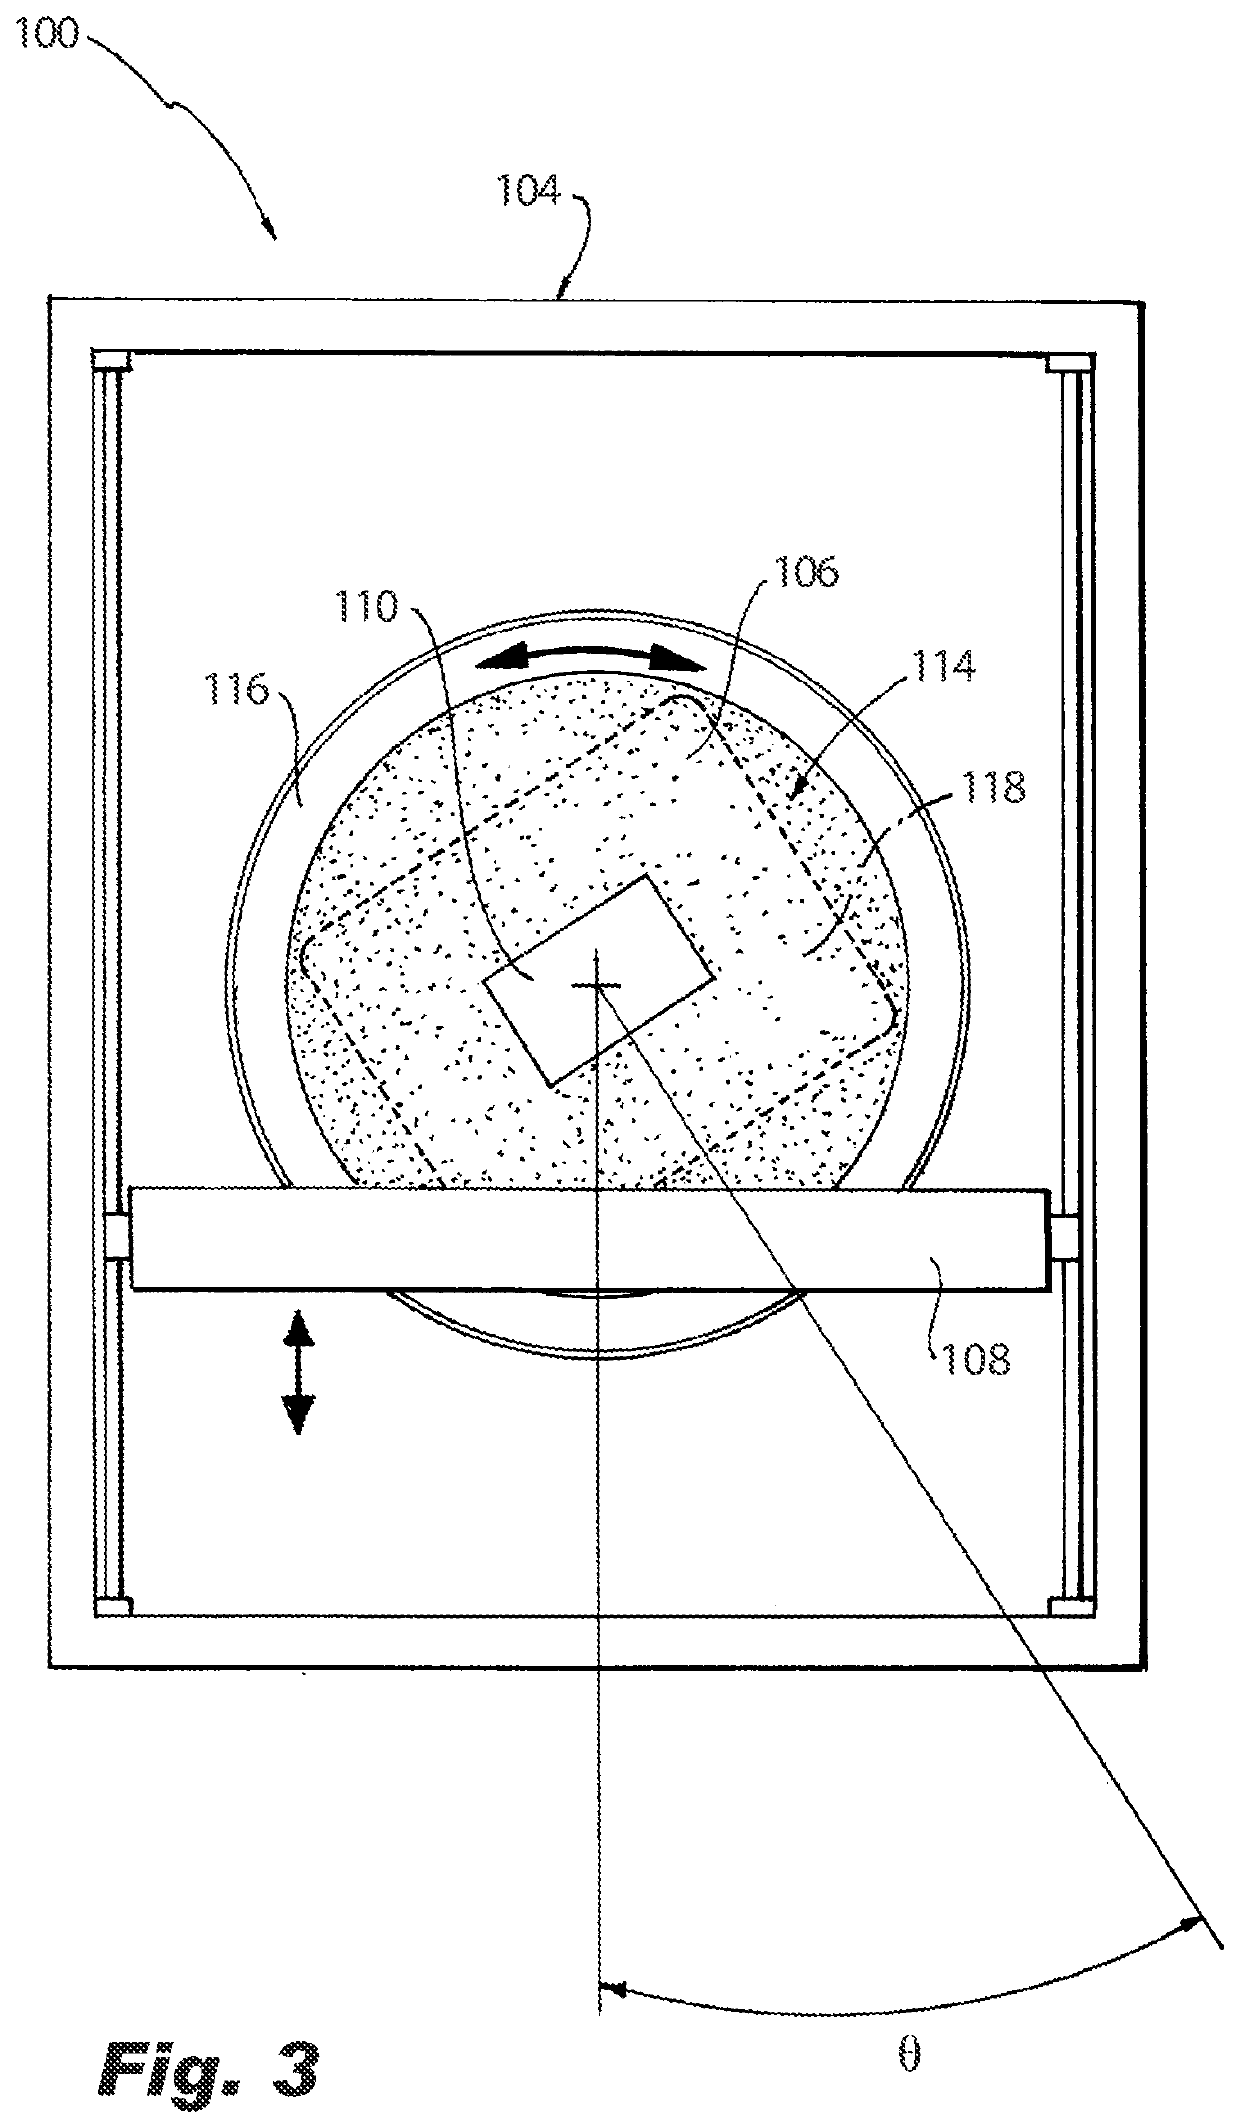 Rotating relative recoater and part orientation